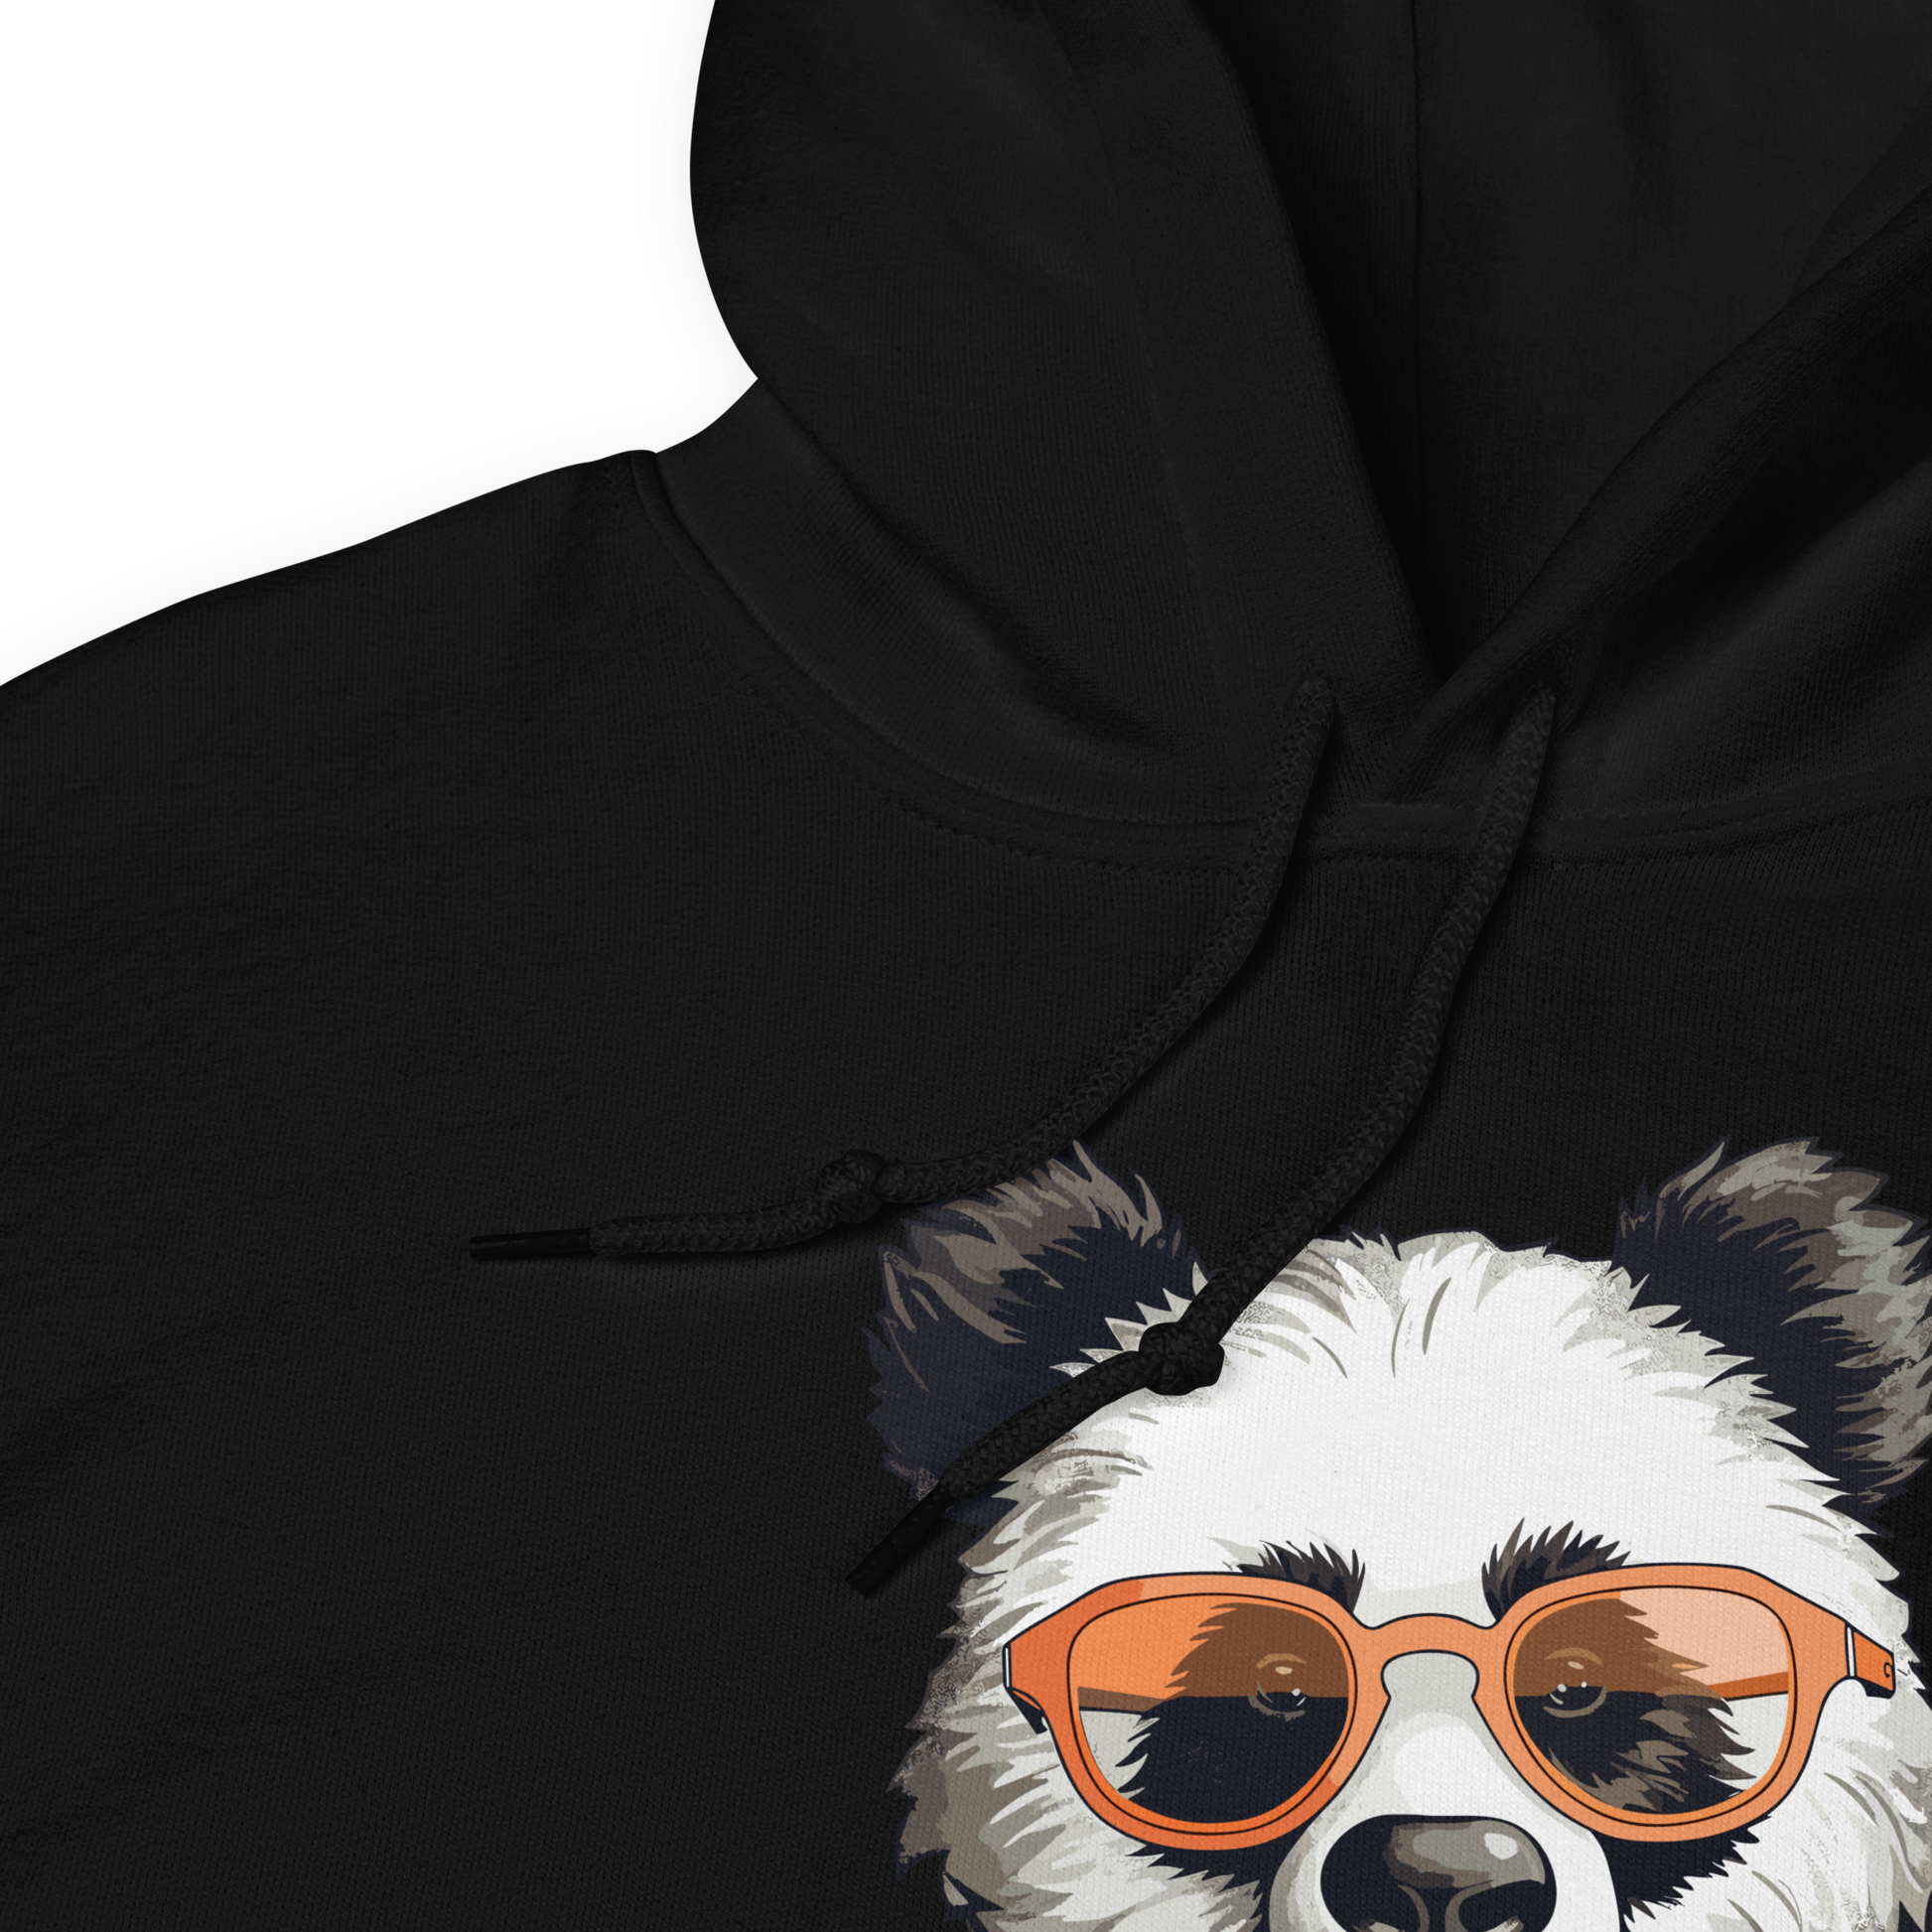 Product details of a Black Panda Hoodie featuring the hilarious Eat, Sleep, Panda, Repeat graphic on the chest - Funny Graphic Panda Hoodies - Boozy Fox